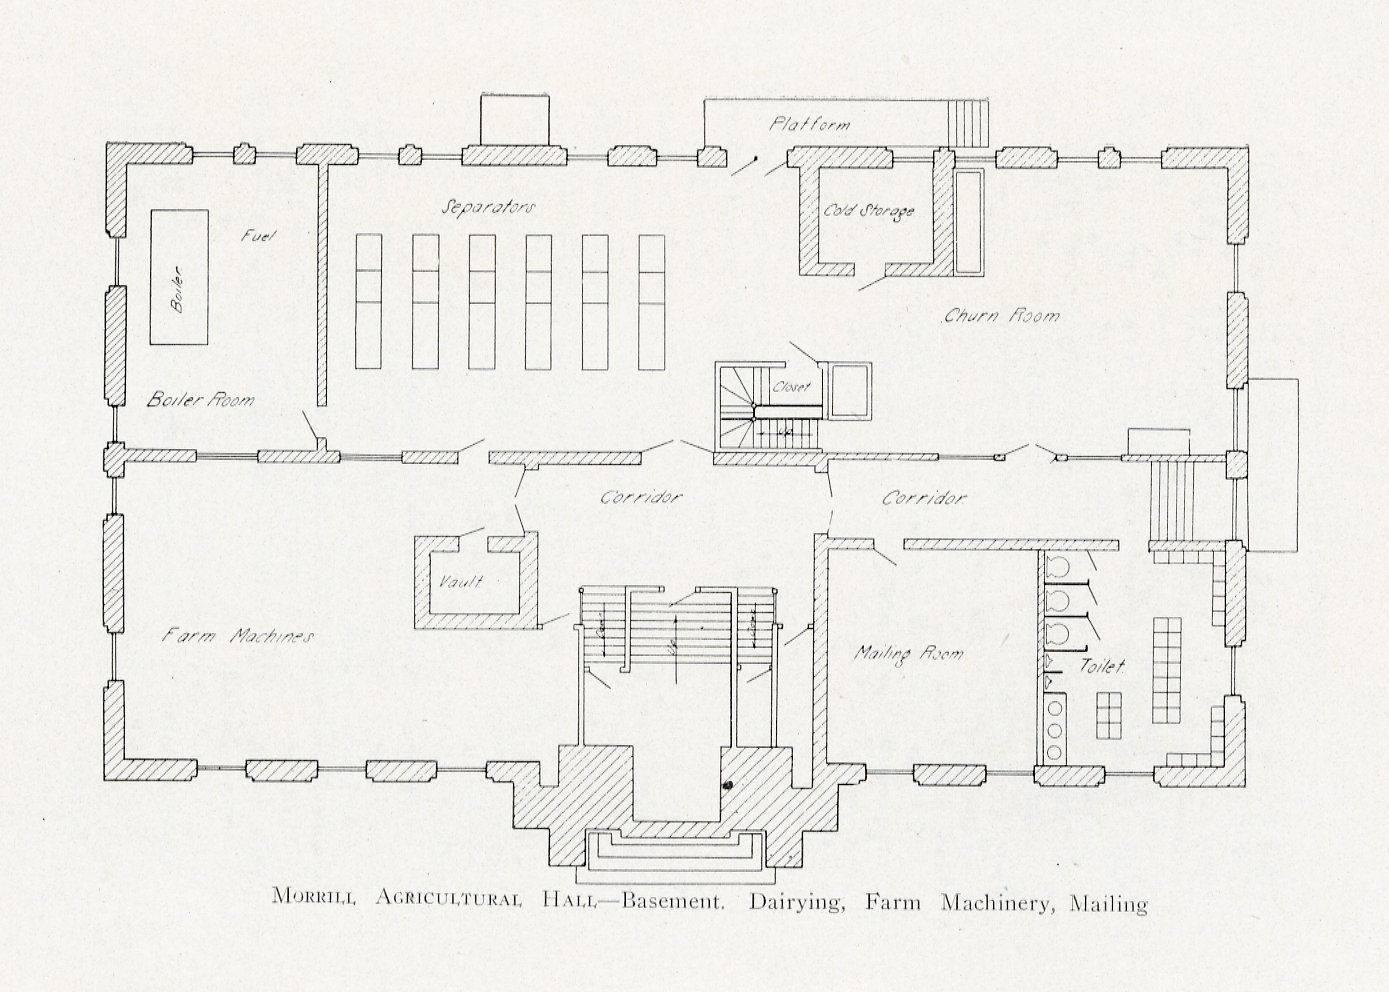 Morrill Hall basement floor plan, showing location of Farm machines, boiler room, separators, churn room, and cold storage for making butter.